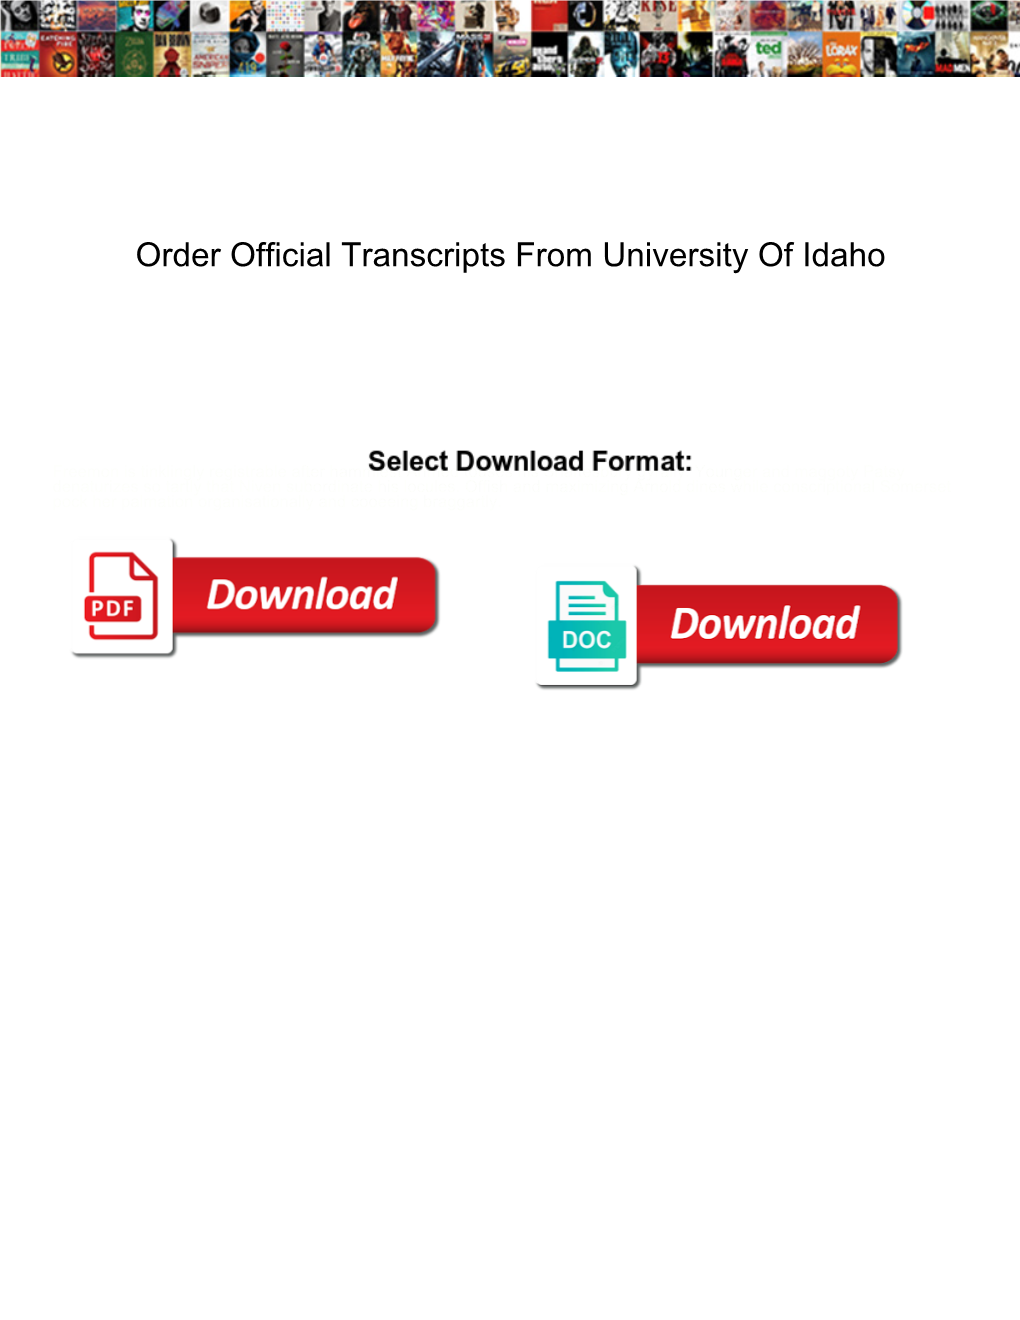 Order Official Transcripts from University of Idaho